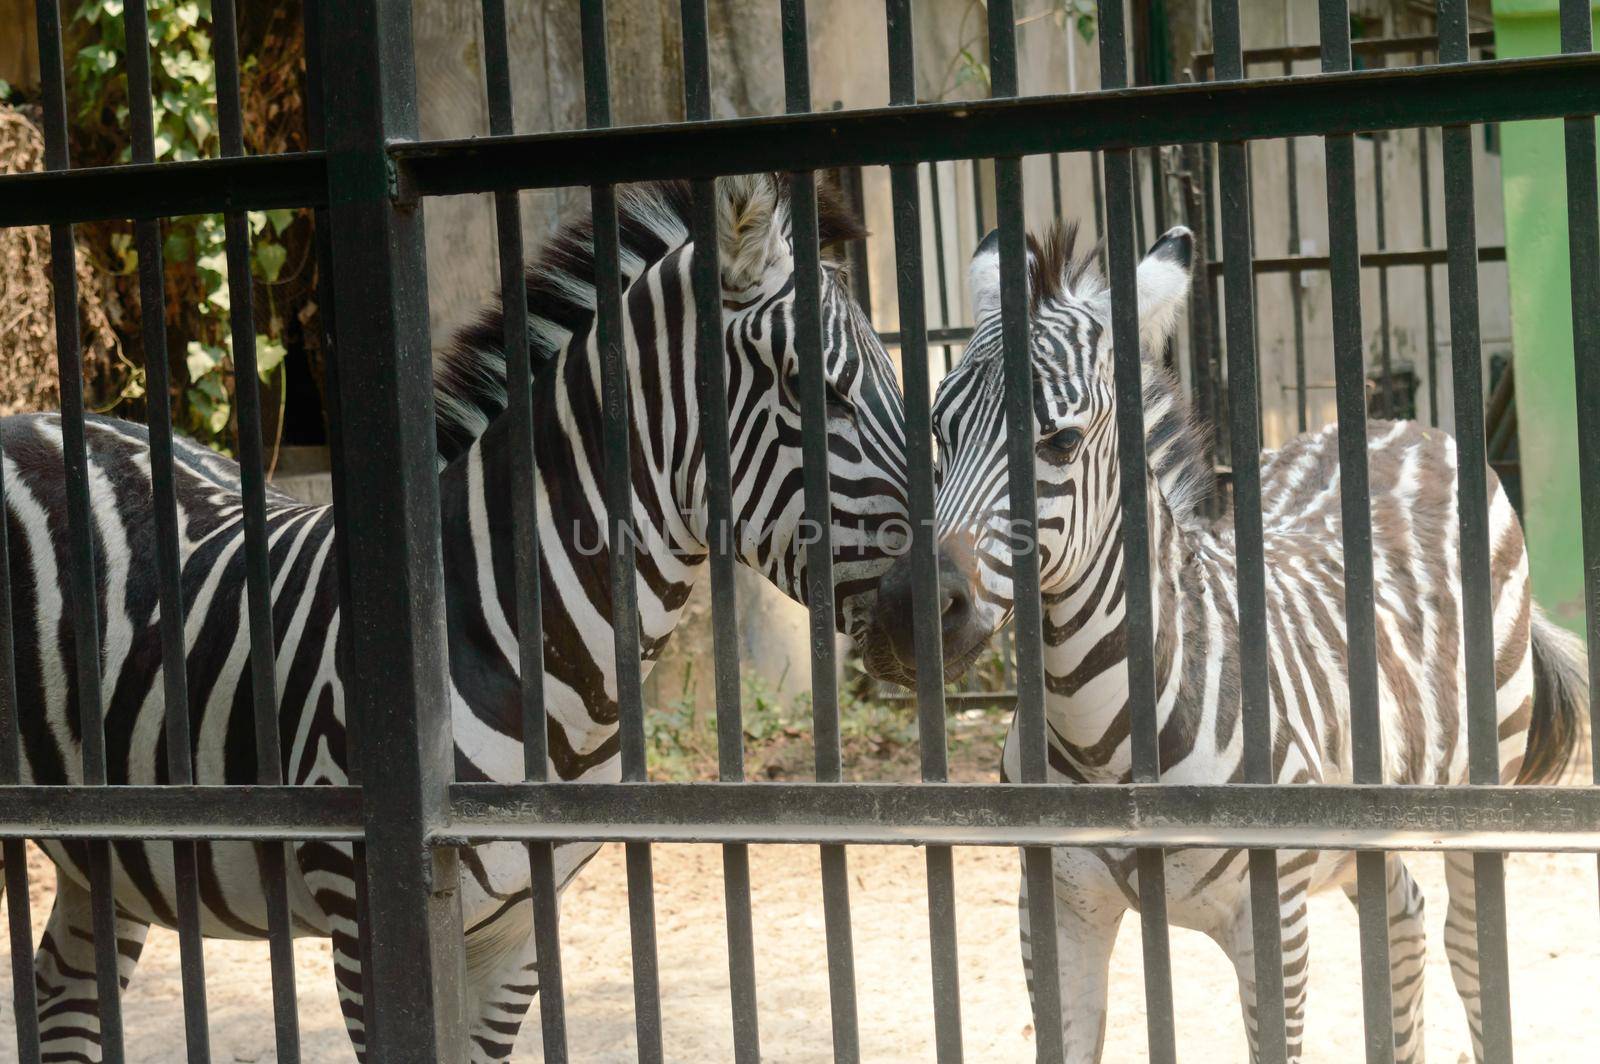 Animals in captivity. White stripes zebra inside the cage in Alipur Zoological Garden, Kolkata, West Bengal, India South Asia. by sudiptabhowmick